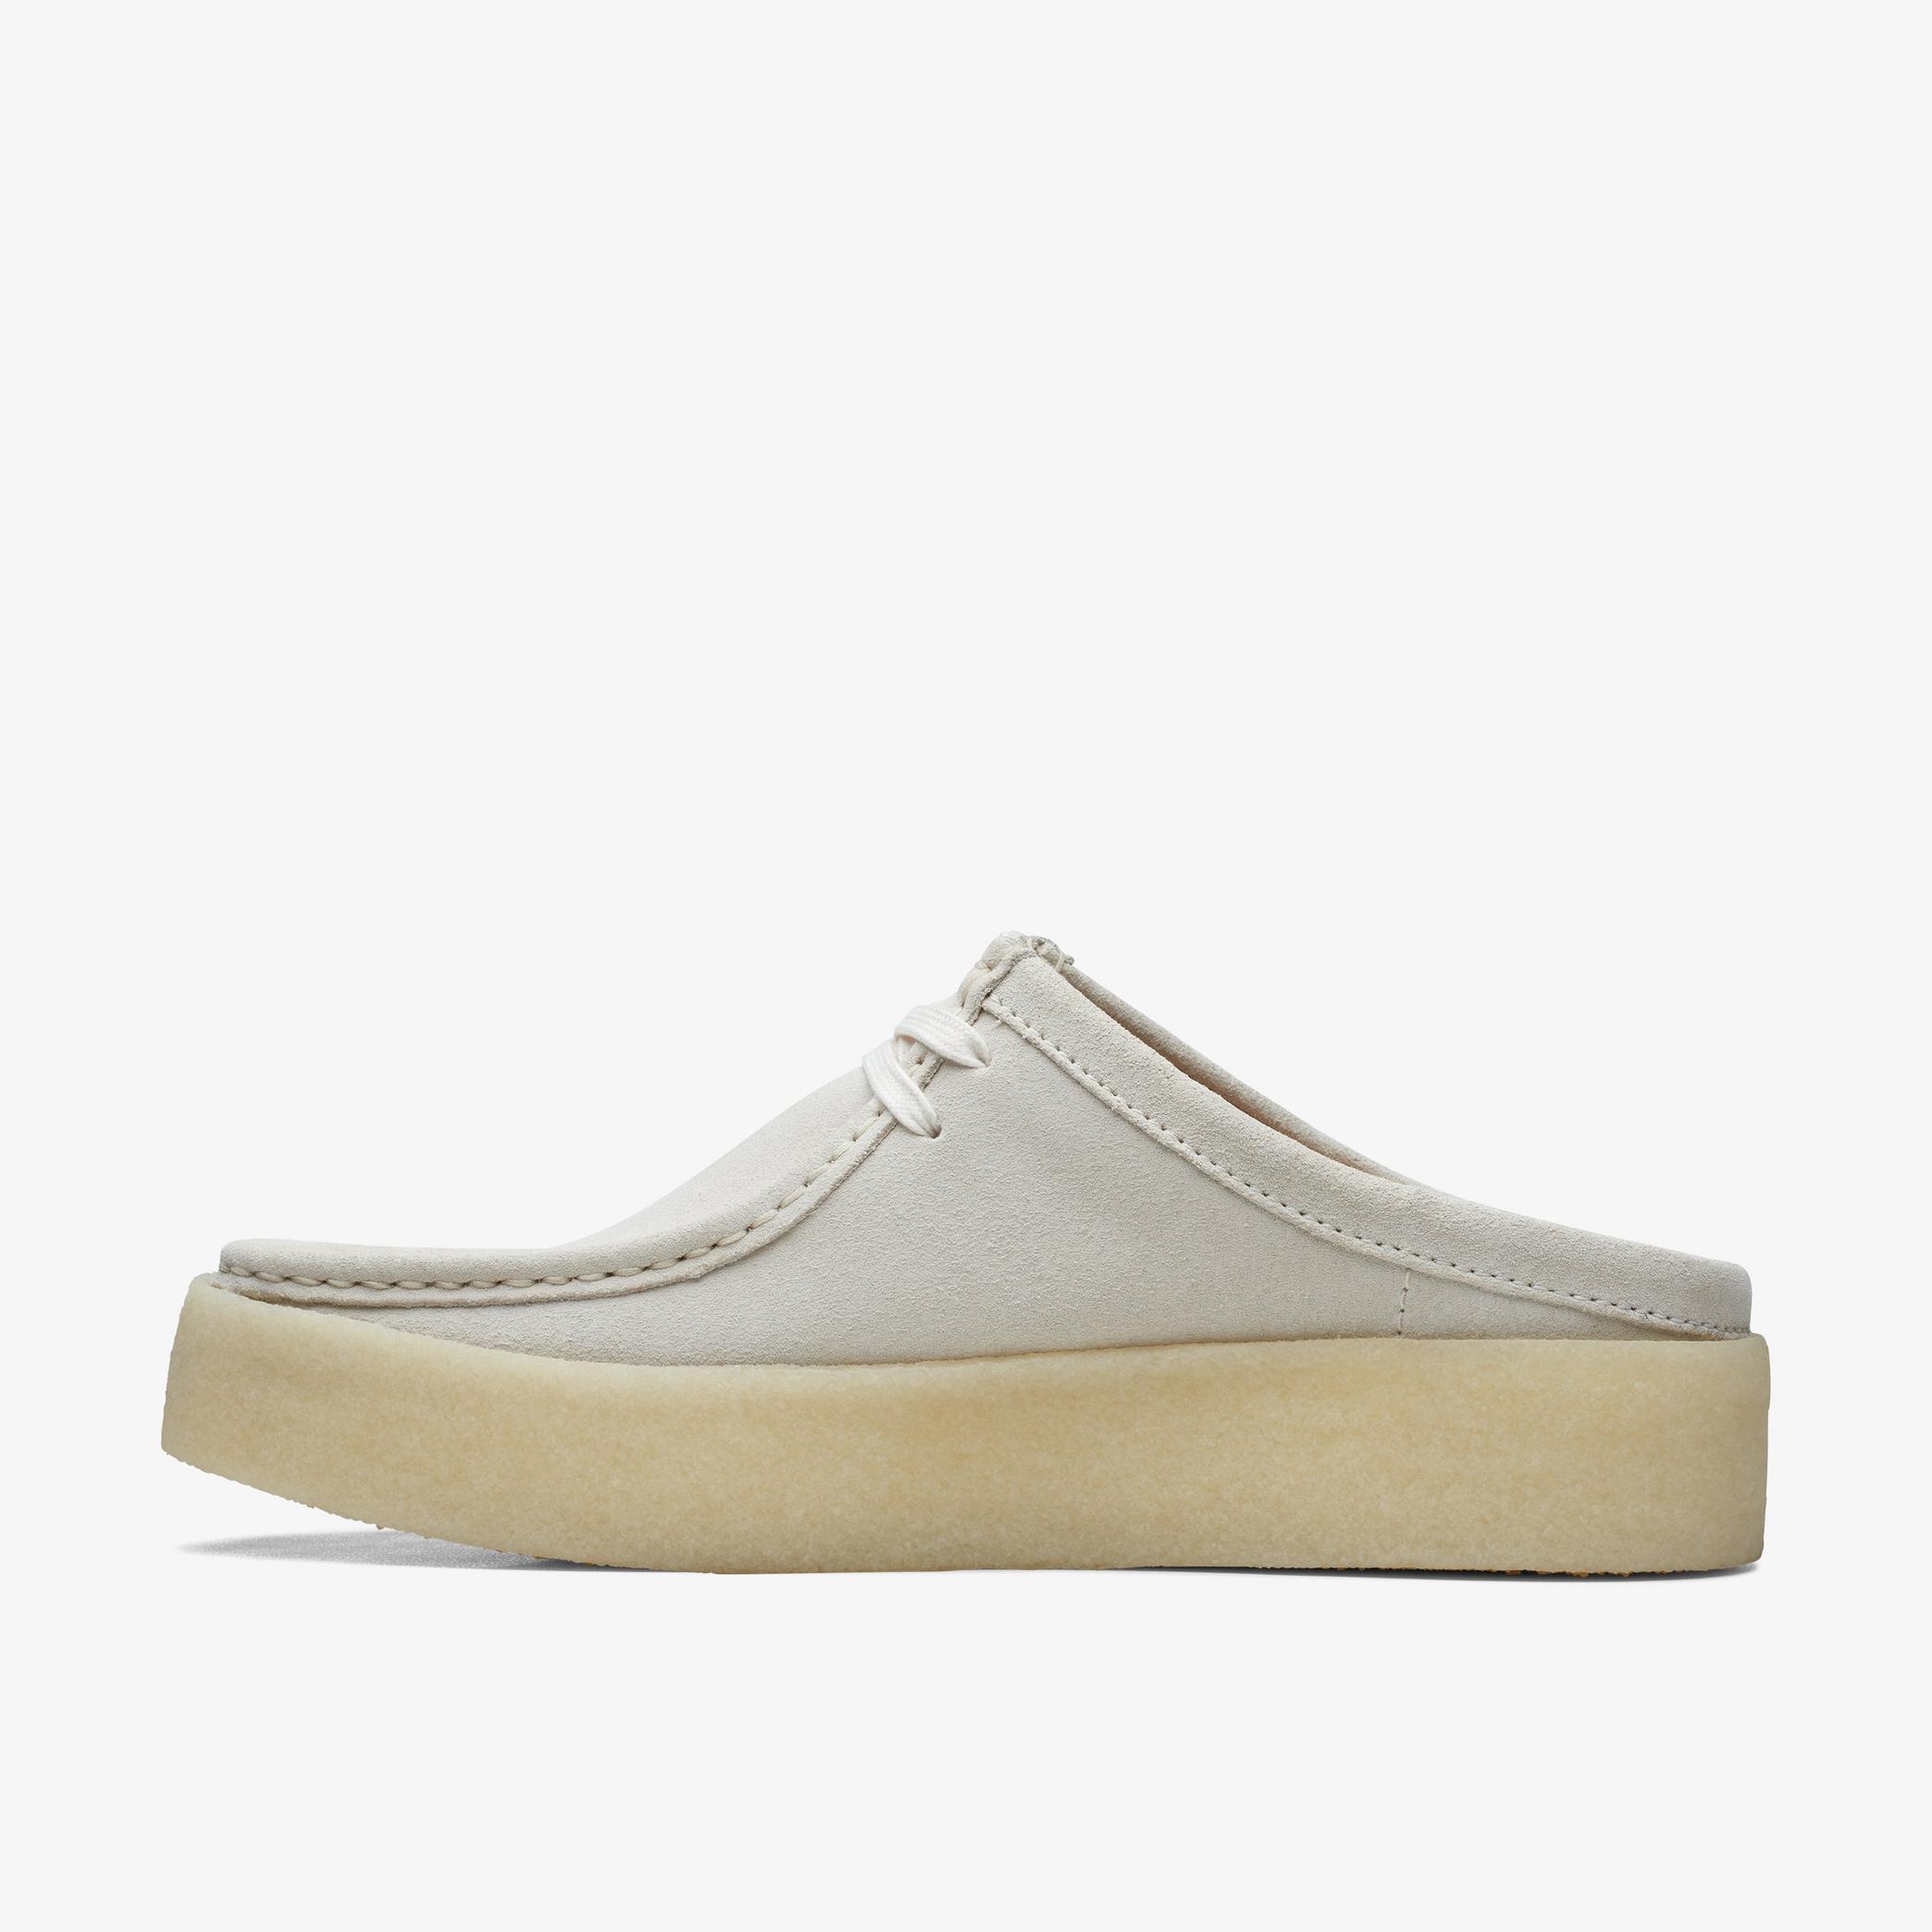 Wallabee Cup Lo Off White Suede Shoes, view 2 of 6